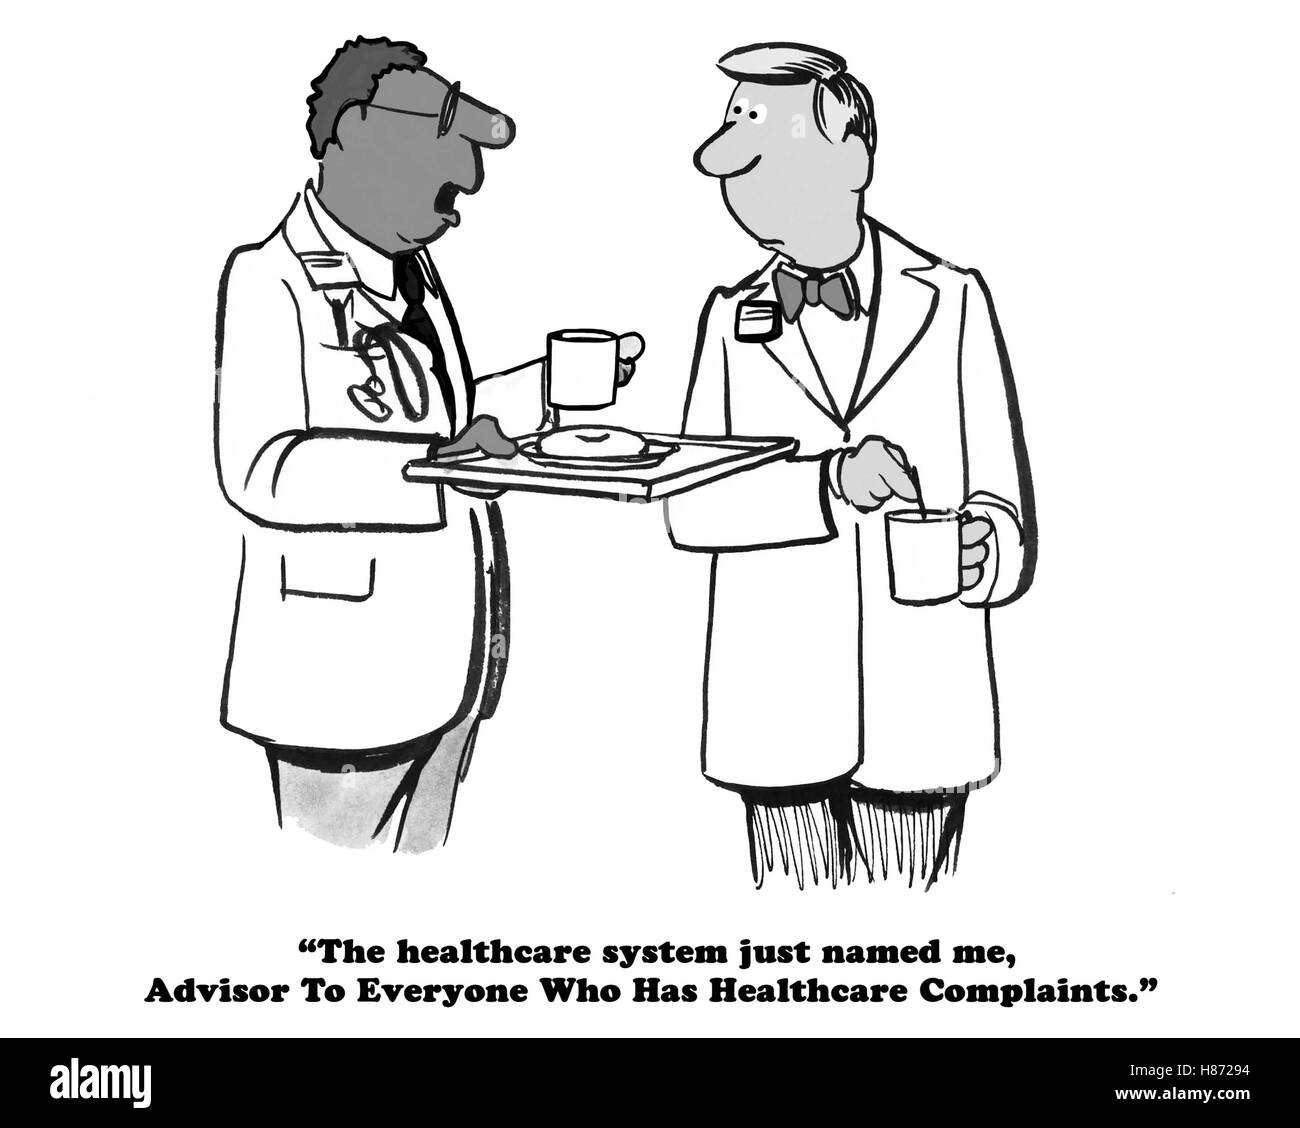 Medical cartoon about being appointed as advisor to everyone with complaints about their health insurance. Stock Photo